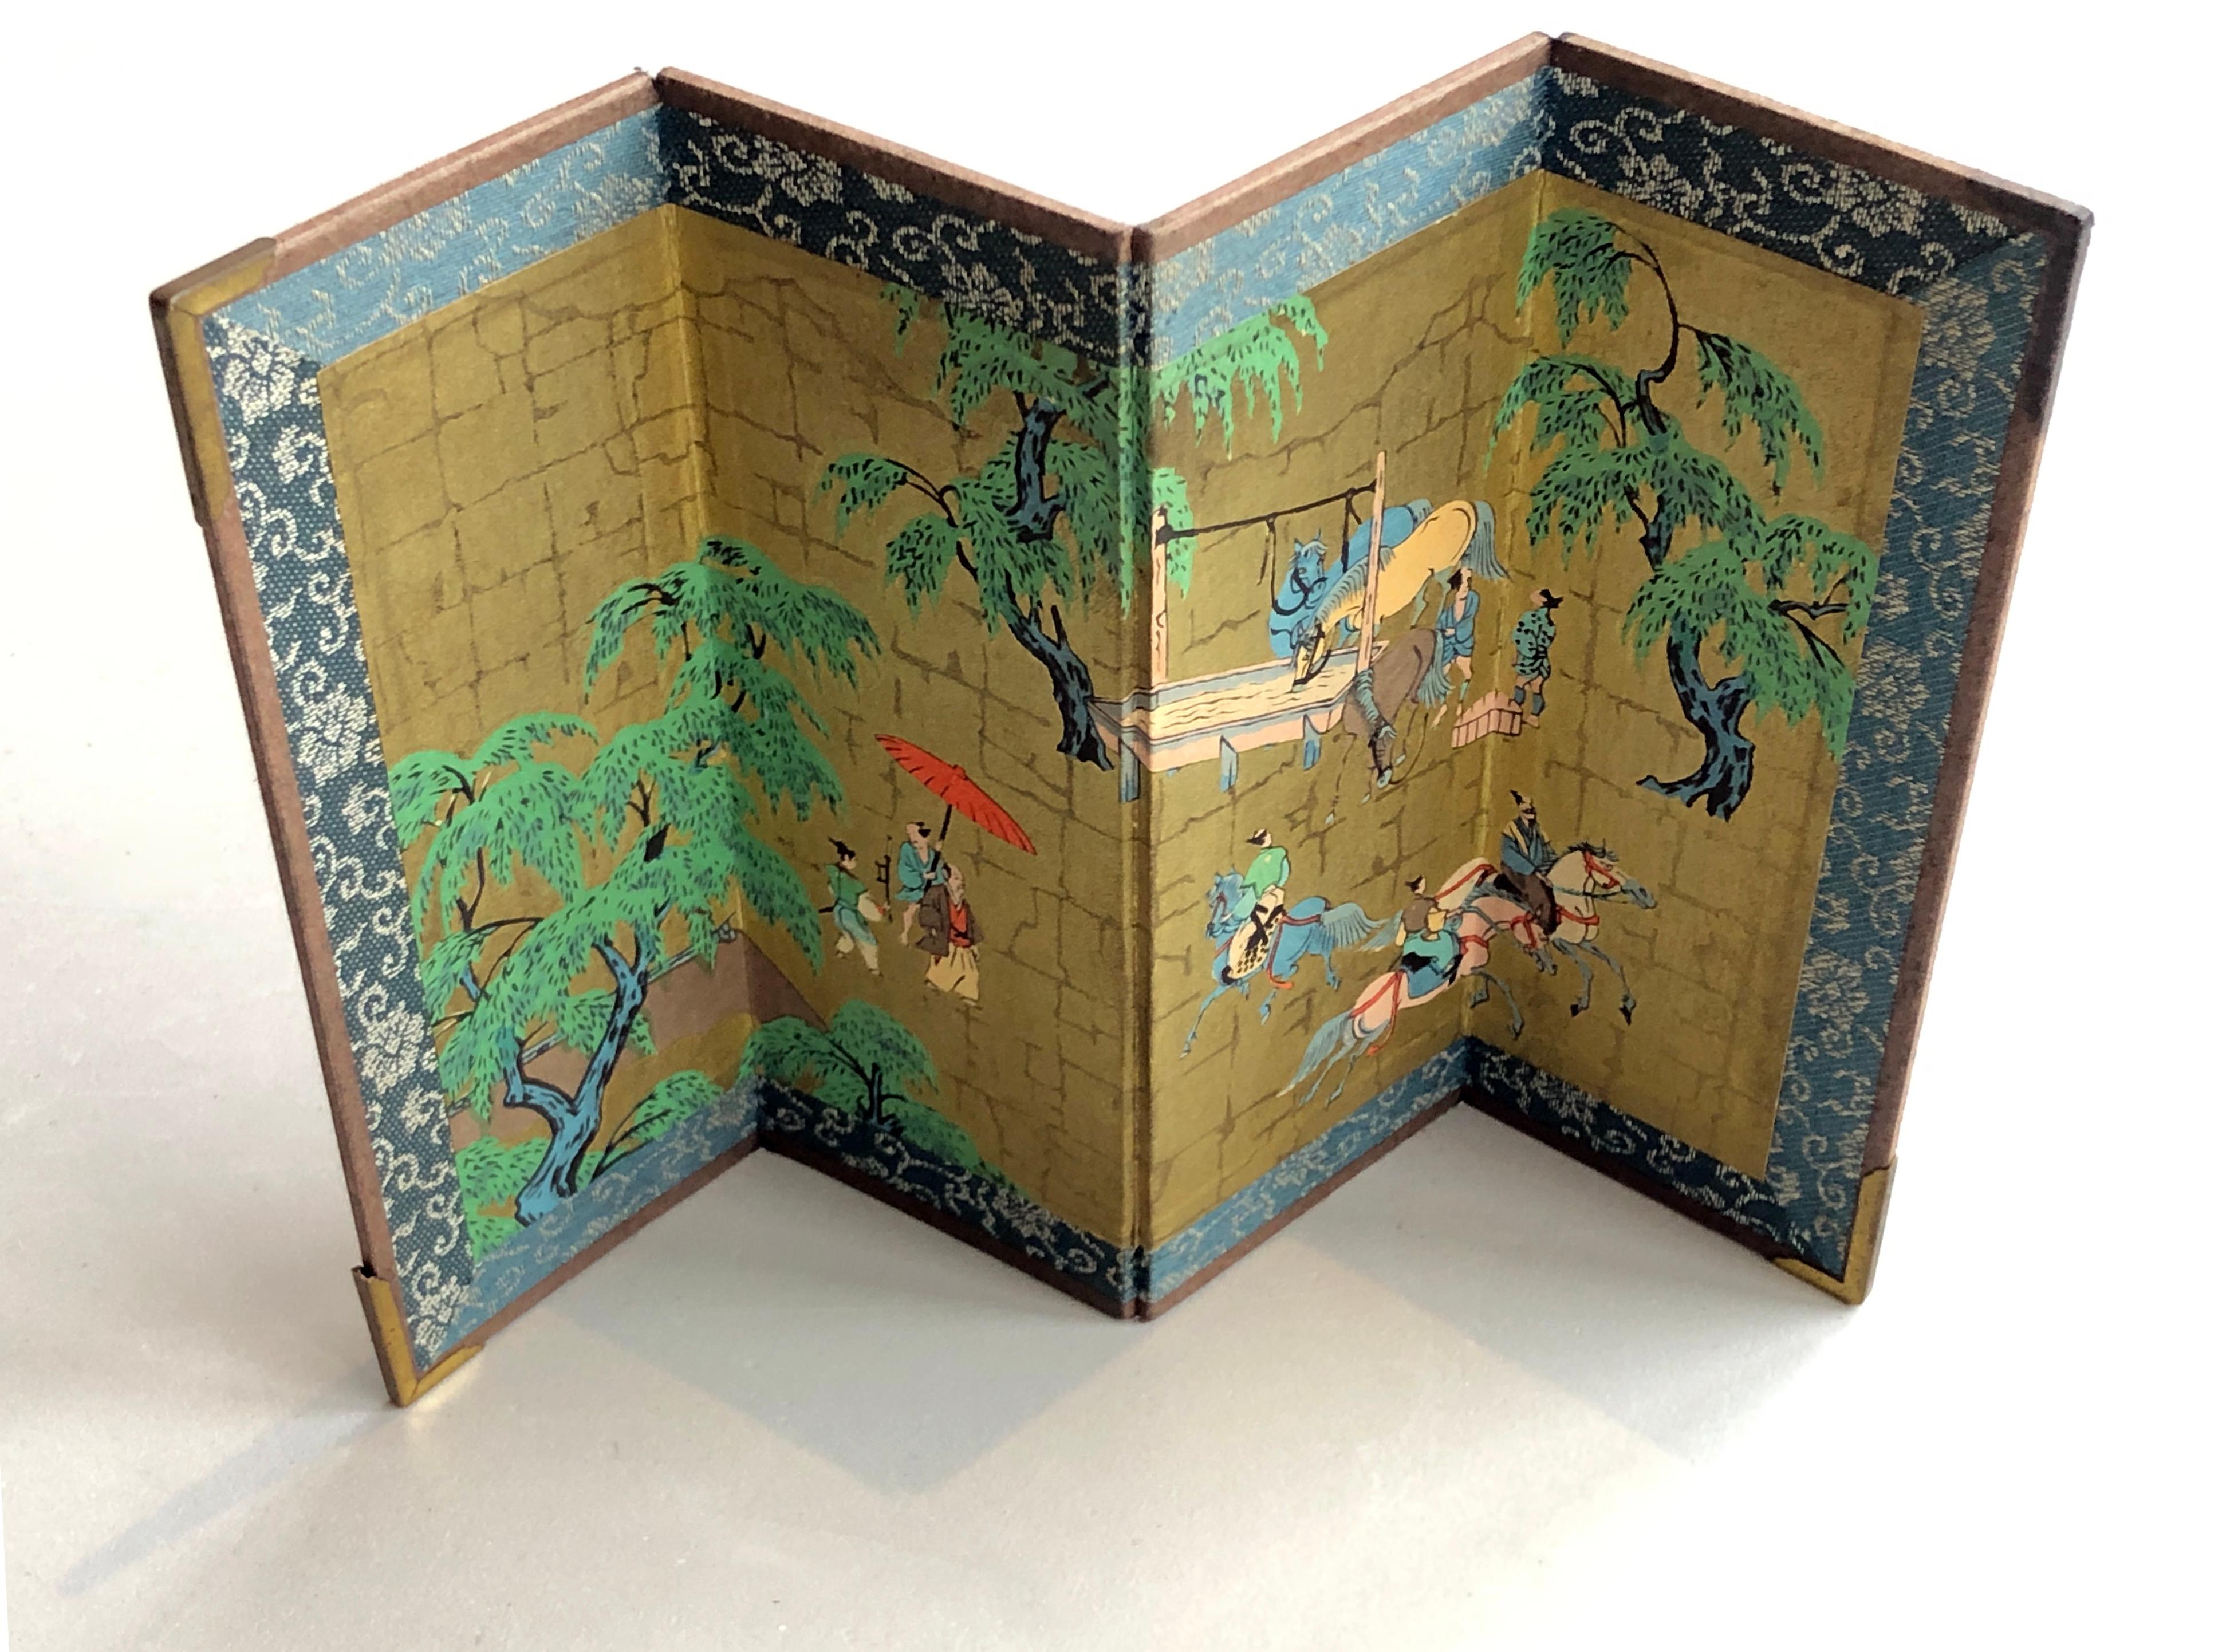 This is a Miniature Oriental Folding Screen featuring Asian painting artwork. The screen is adorned with gold tone corner protectors, although the top right corner one is missing. The background is patterned in gold with depictions of trees and